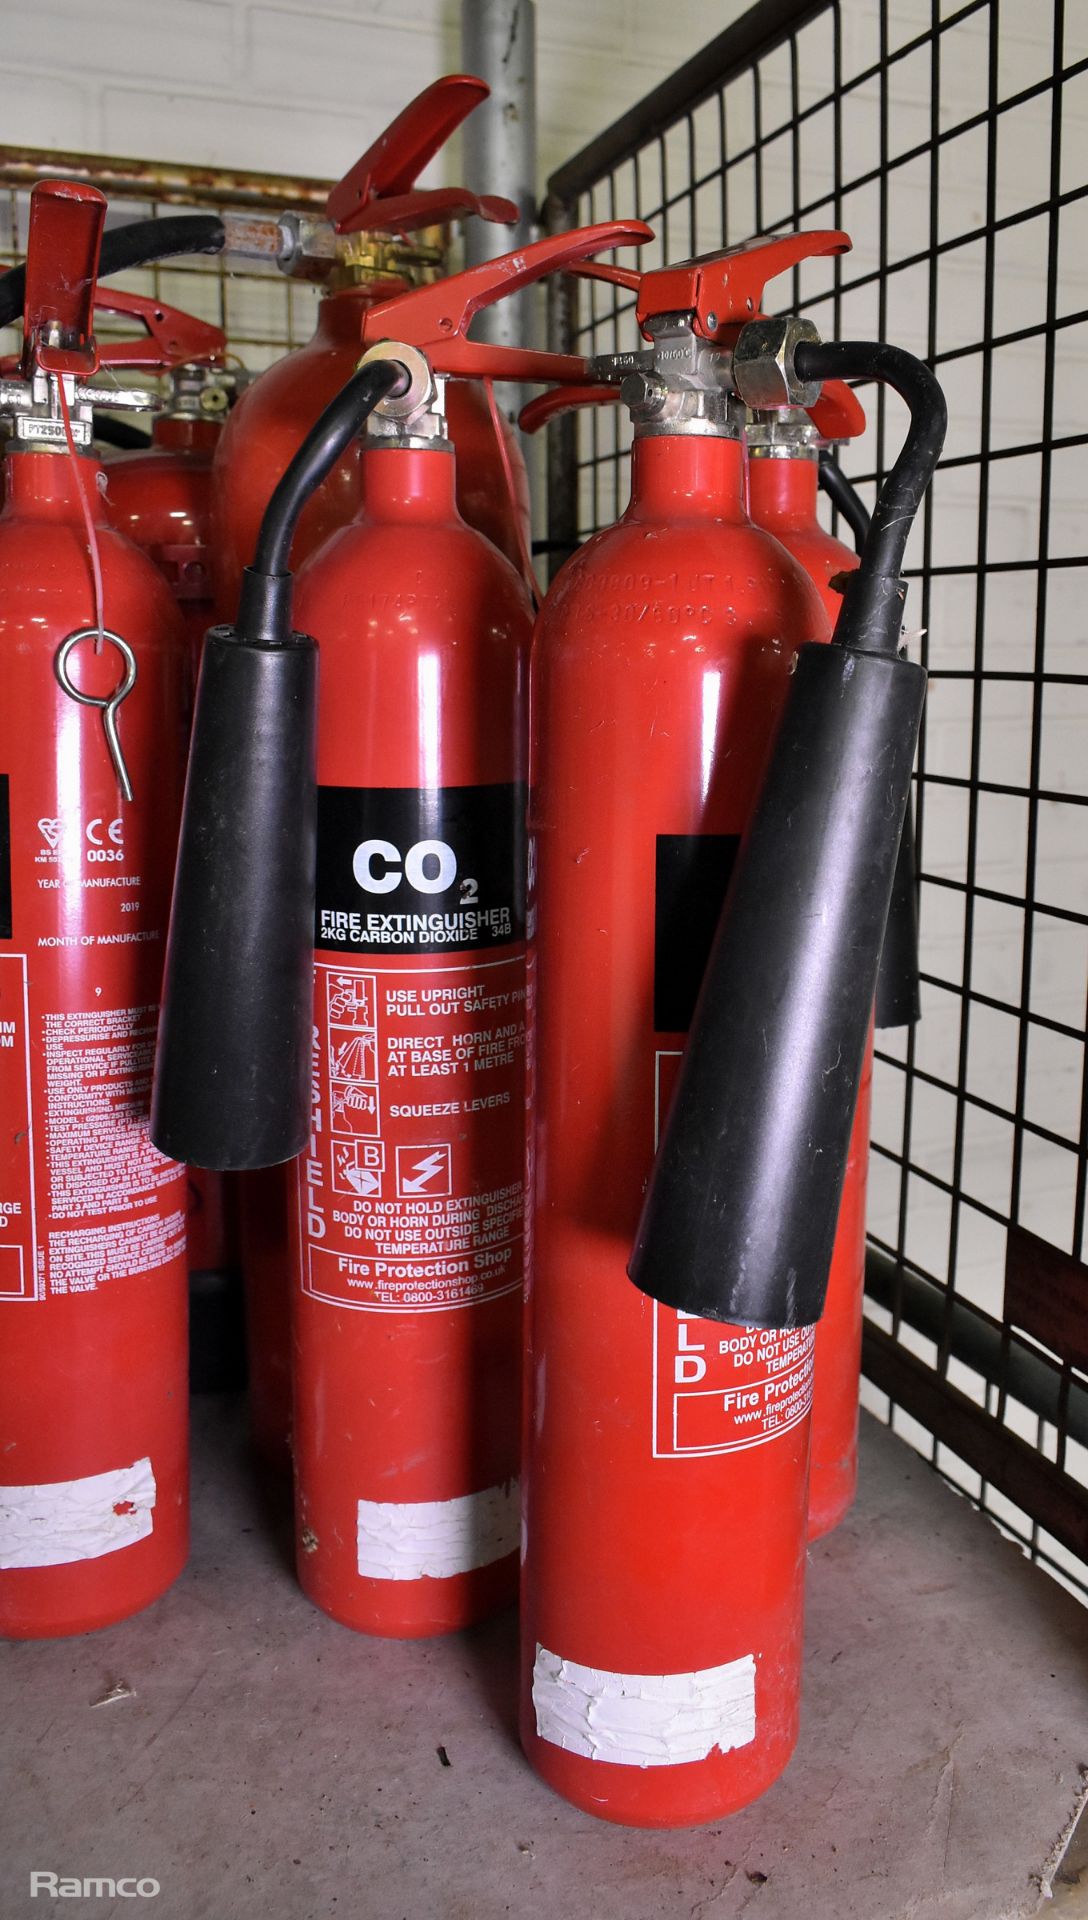 18x Fire extinguishers mixed sizes - powder, water & CO2 - NEEDS SERVICING BEFORE USE - Image 5 of 5